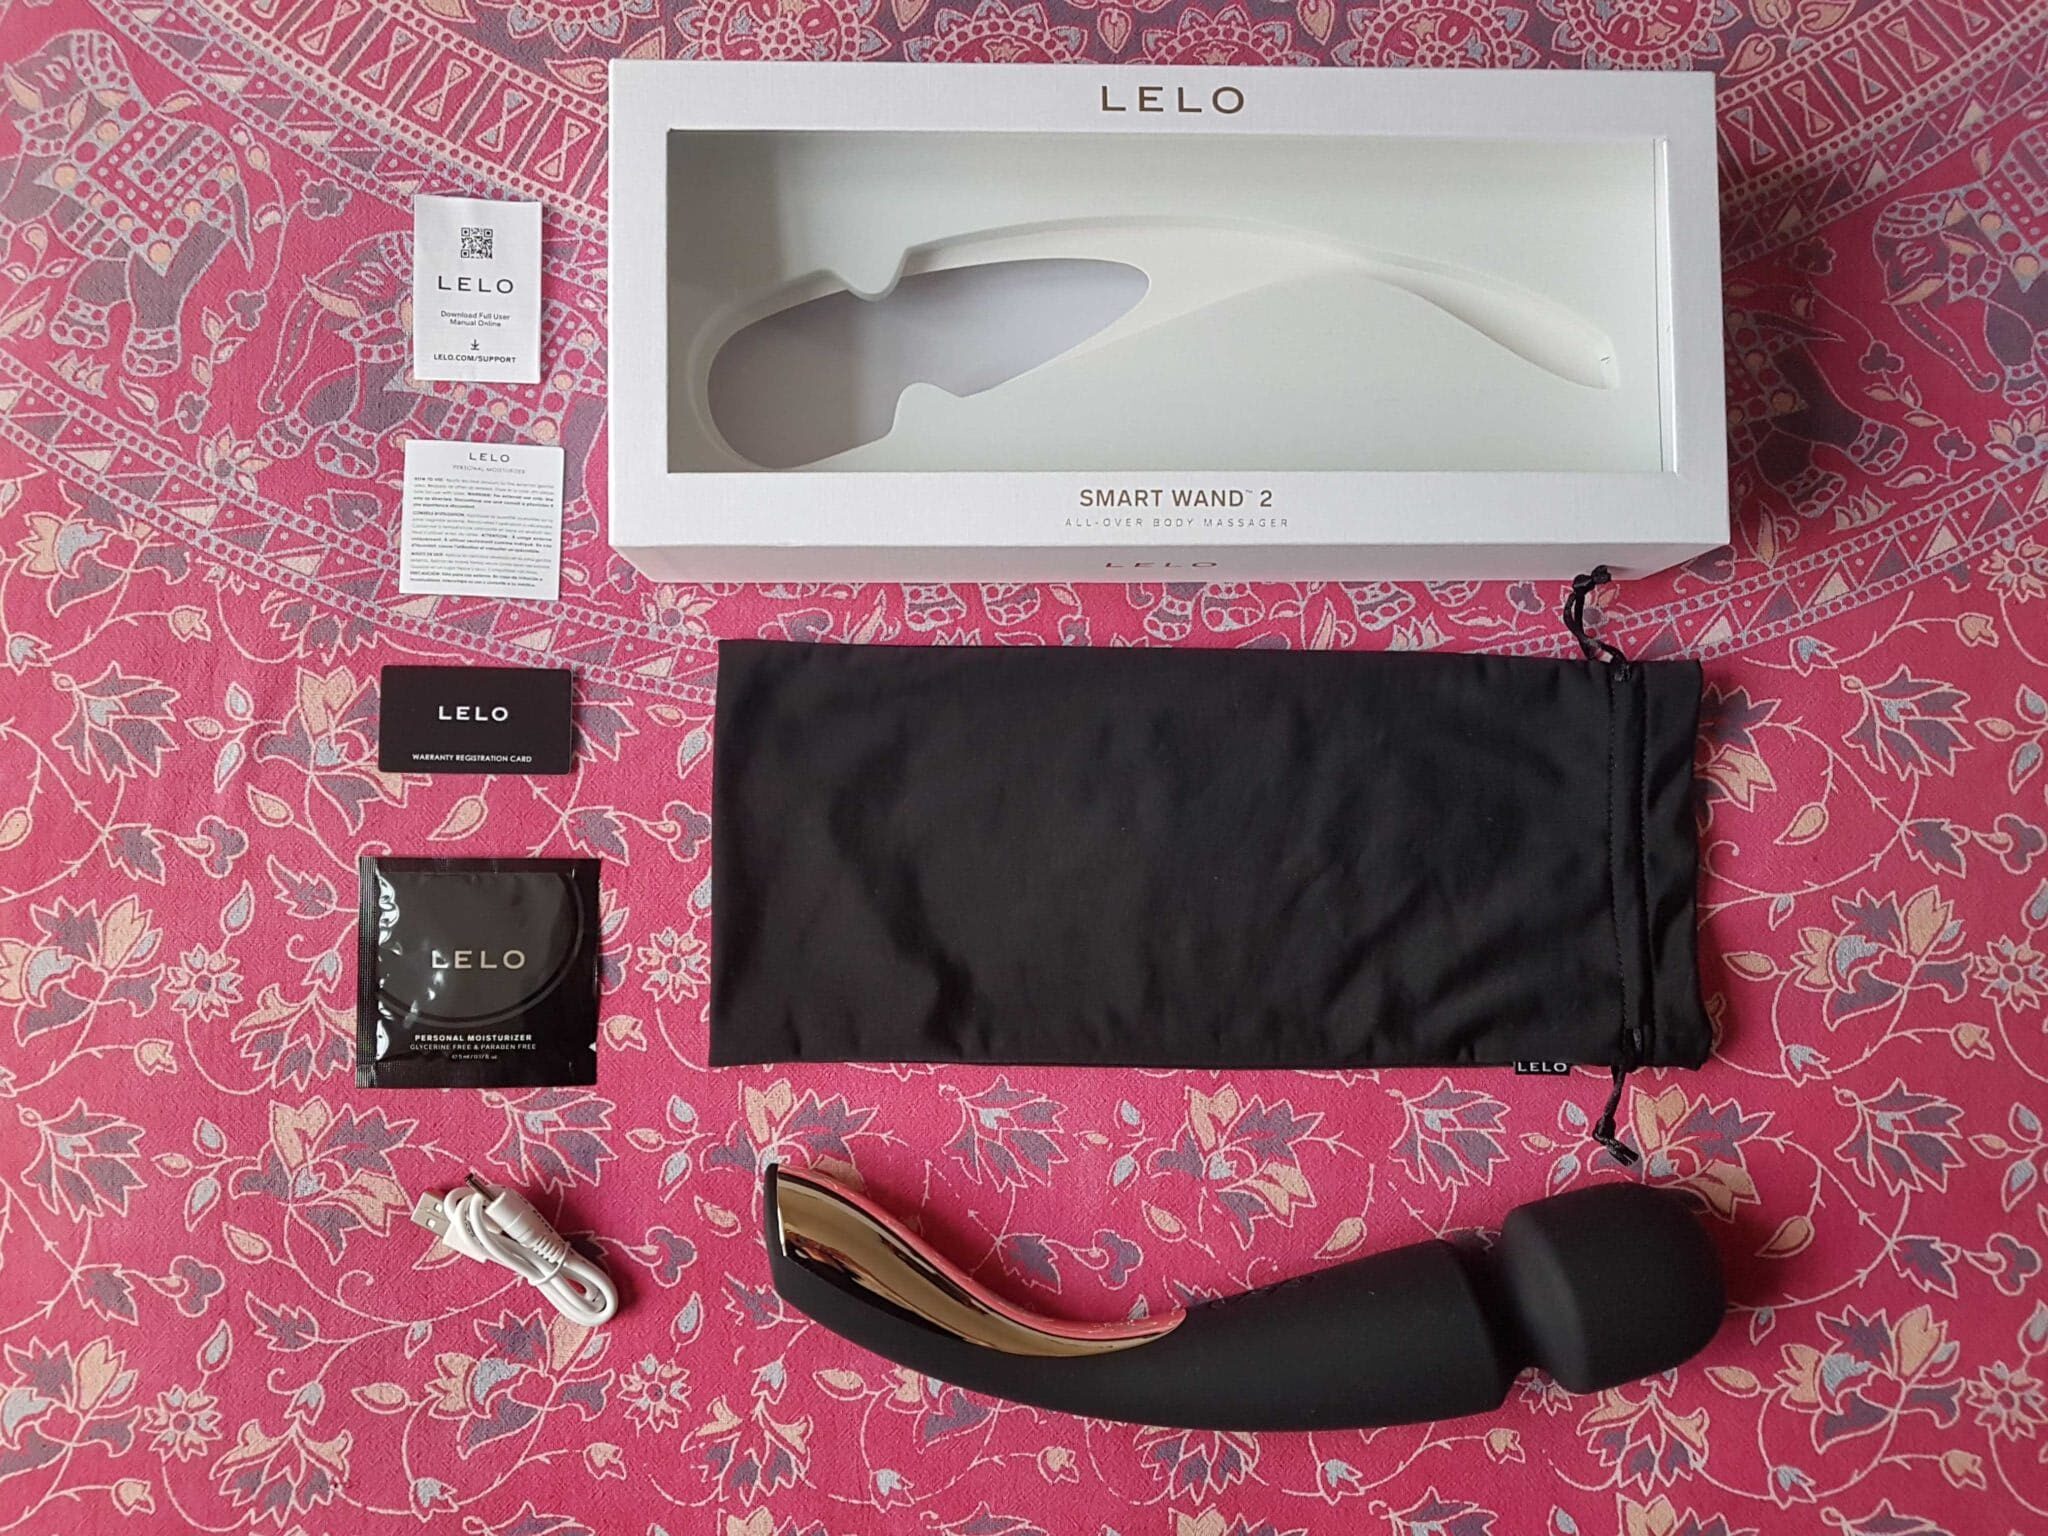 Lelo Smart Wand 2 Large Price and Value: Analyzing the Lelo Smart Wand 2 Large